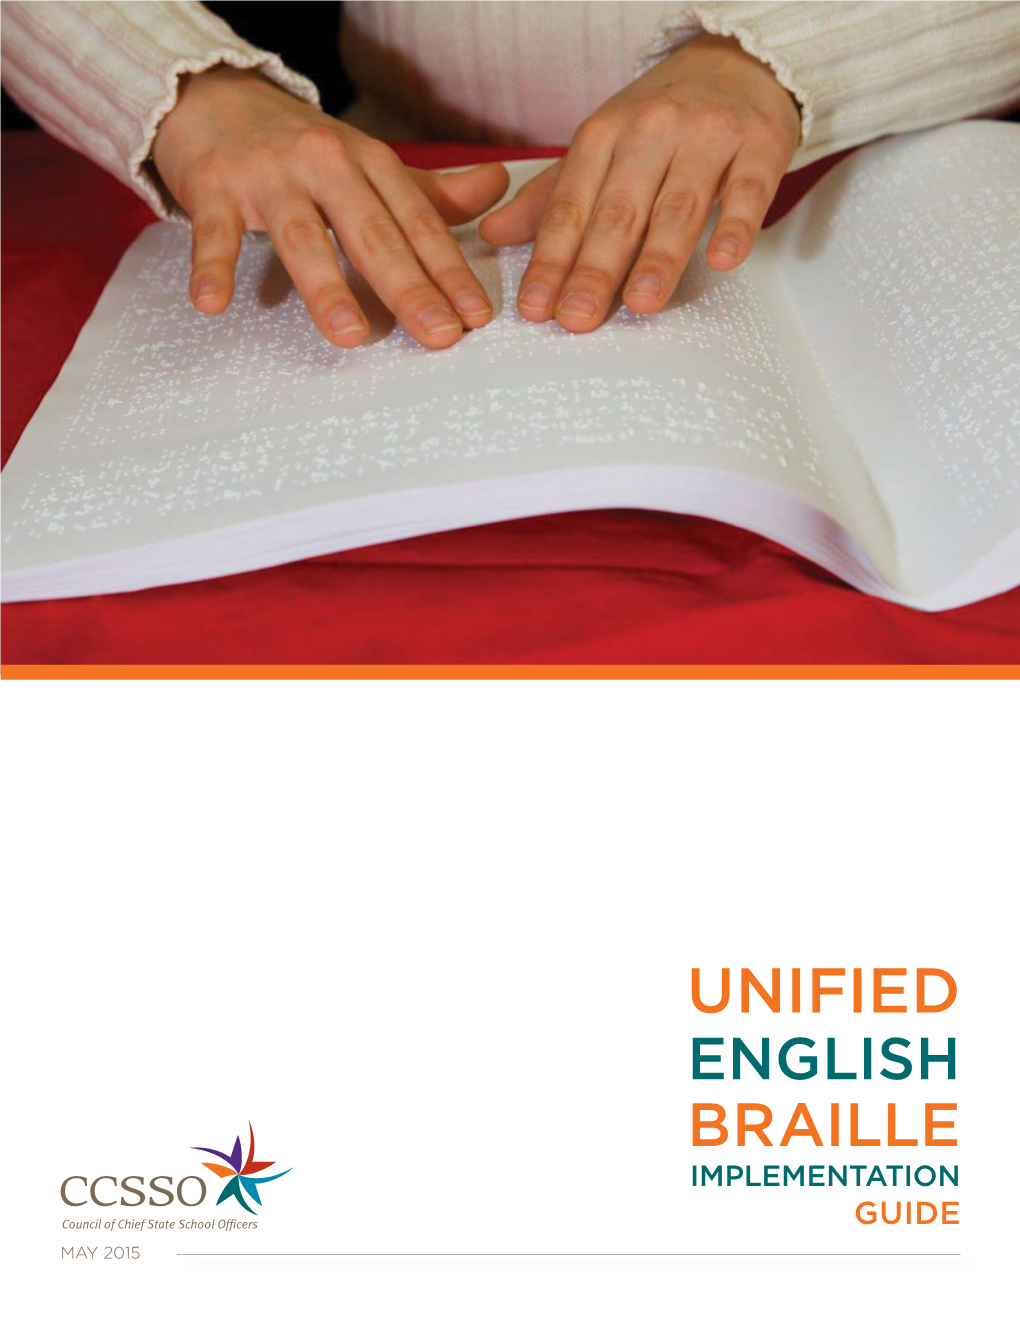 Unified English Braille Implementation Guide May 2015 the Council of Chief State School Officers